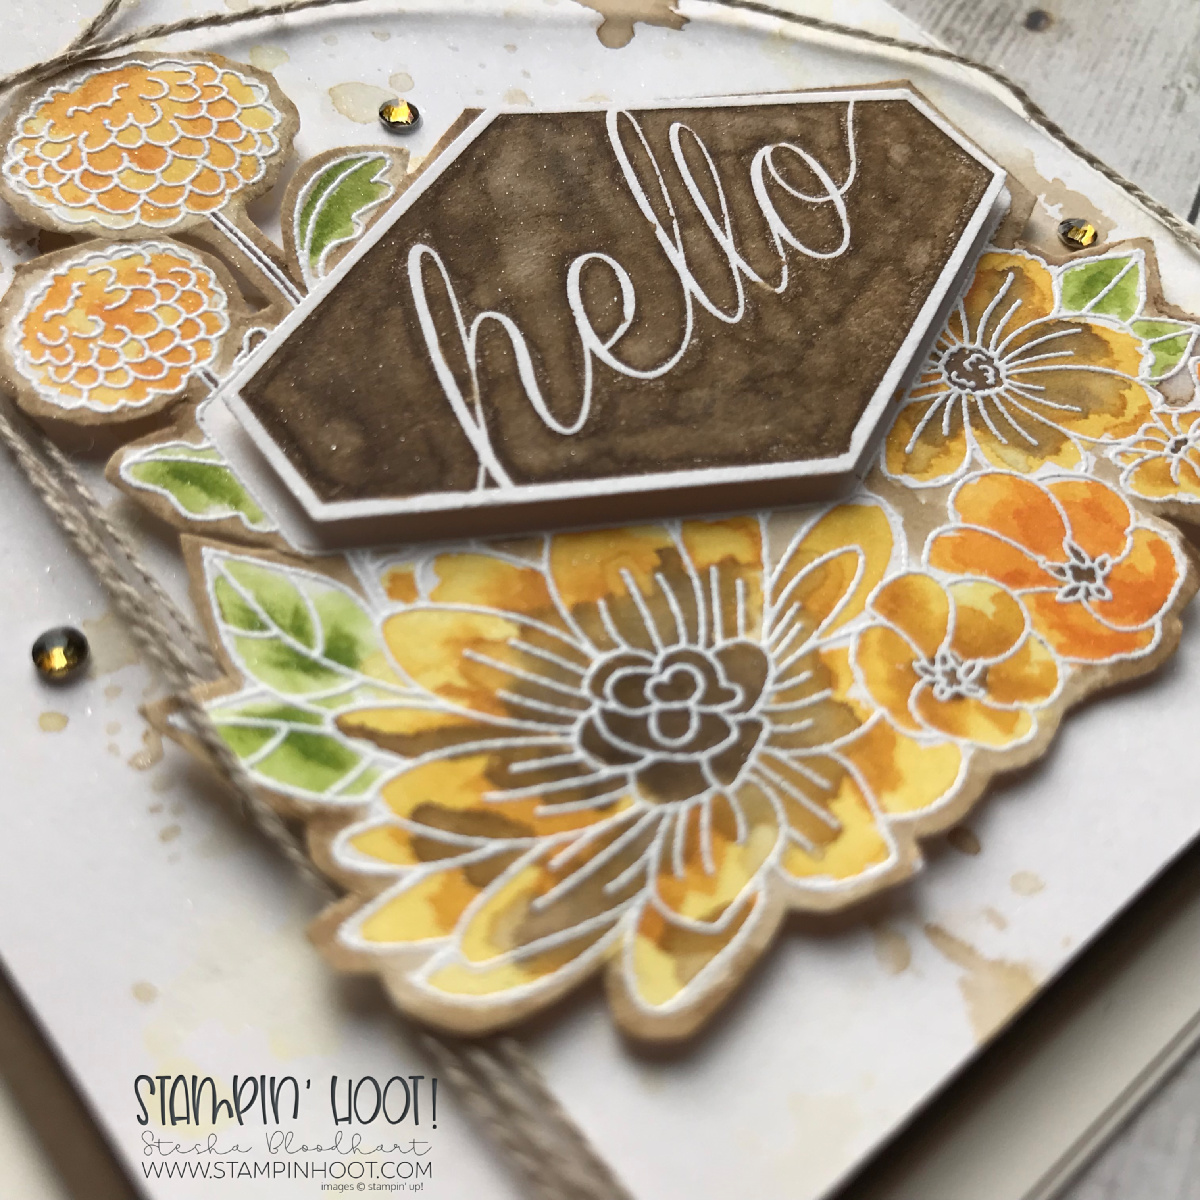 Accented Blooms Stamp Set by Stampin' Up! Hello Card by Stesha Bloodhart, Stampin' Hoot! #steshabloodhart #stampinhoot